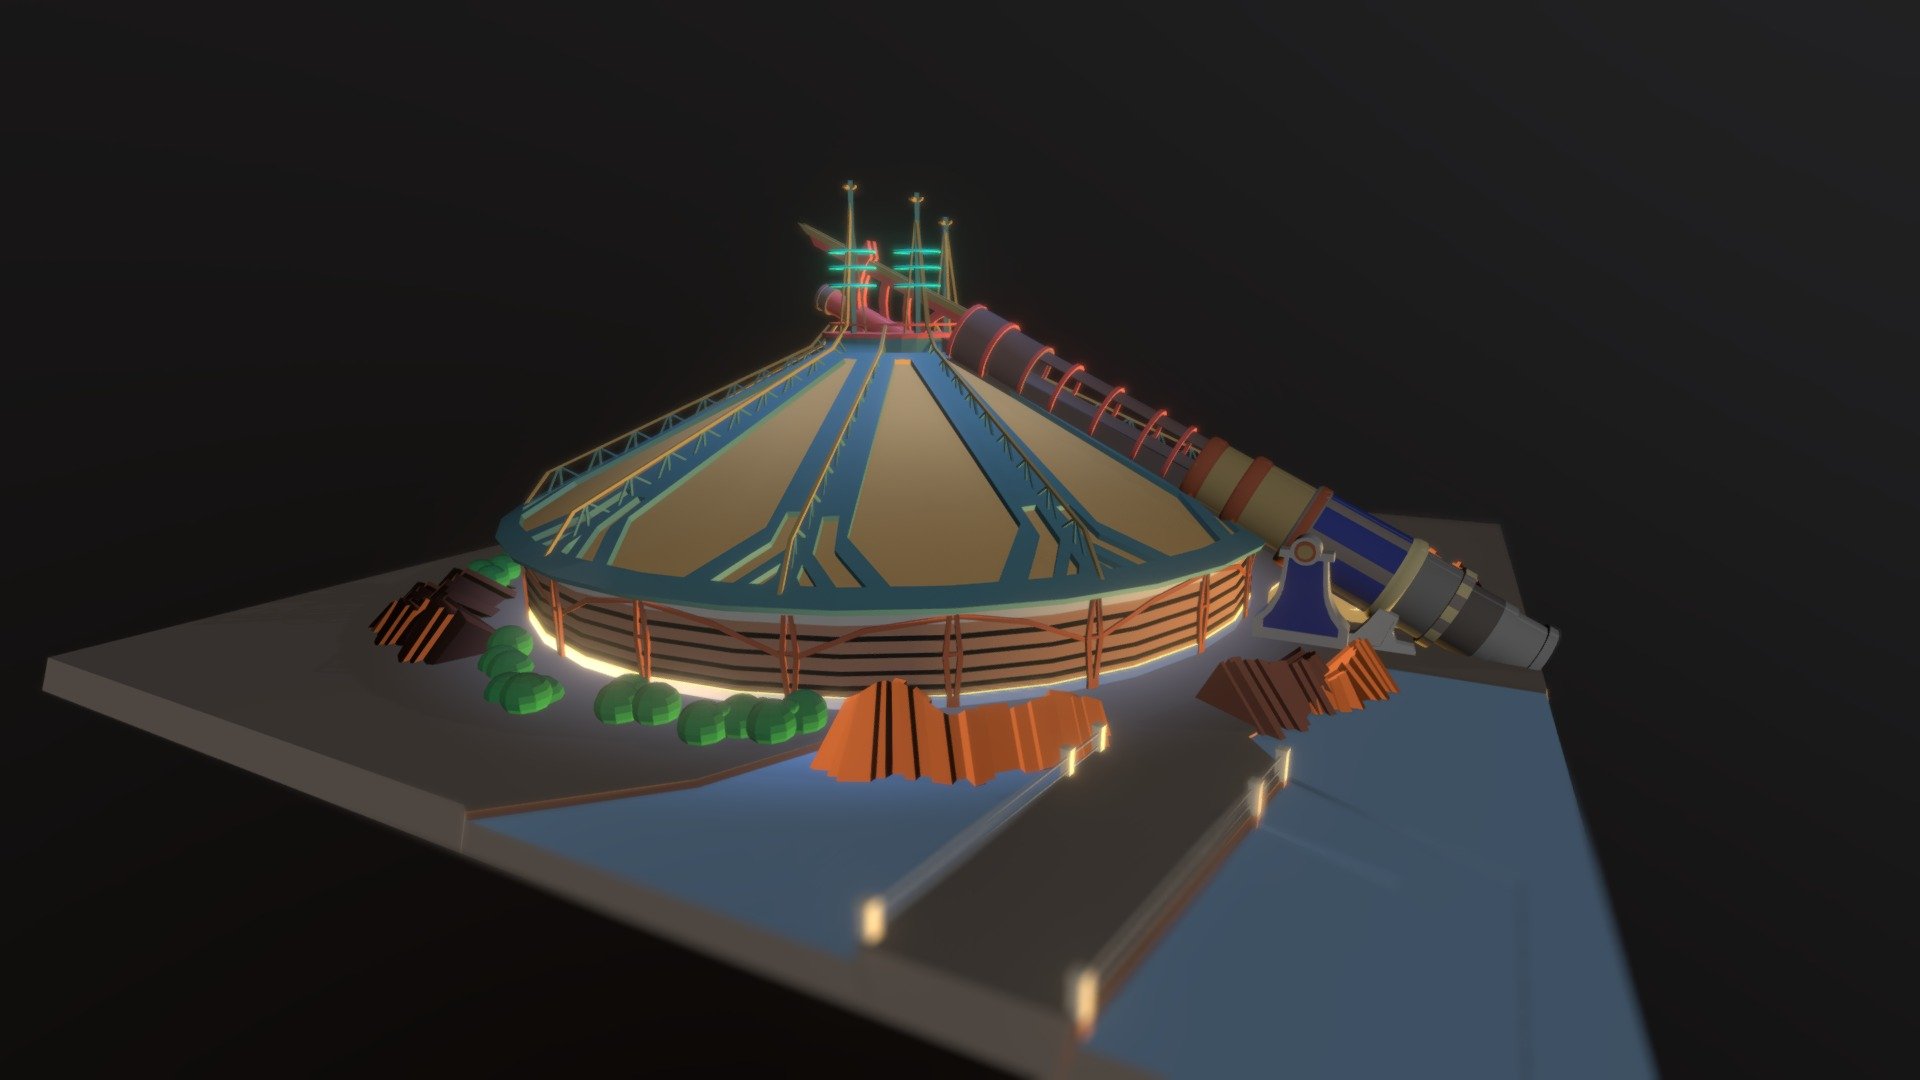 here is a small and simple modeling of space Mountain from disneyland Paris, made on maya 3d model